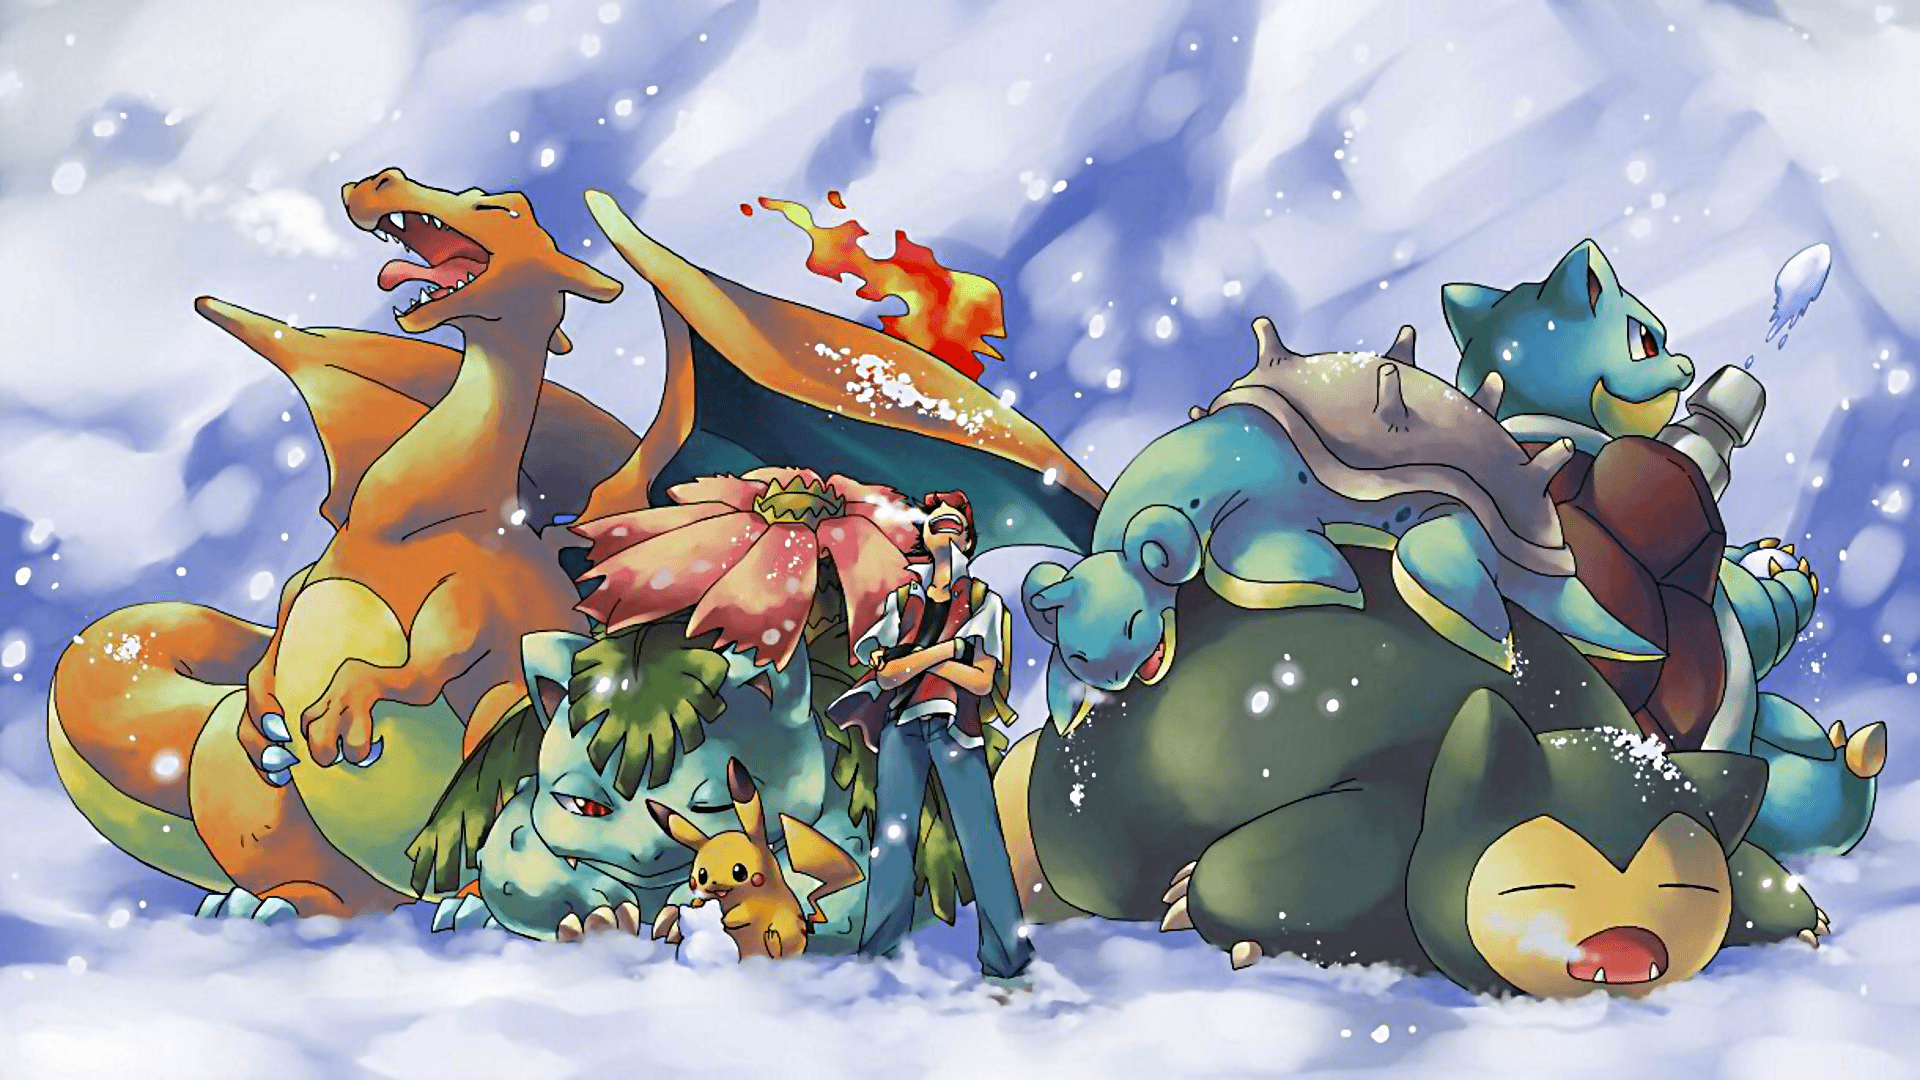 1920x1080 Picture Vs. Red Mt. Silver Pokemon Wallpapers Top Free Picture Vs. Red Mt. Silver Pokemon Backgrounds